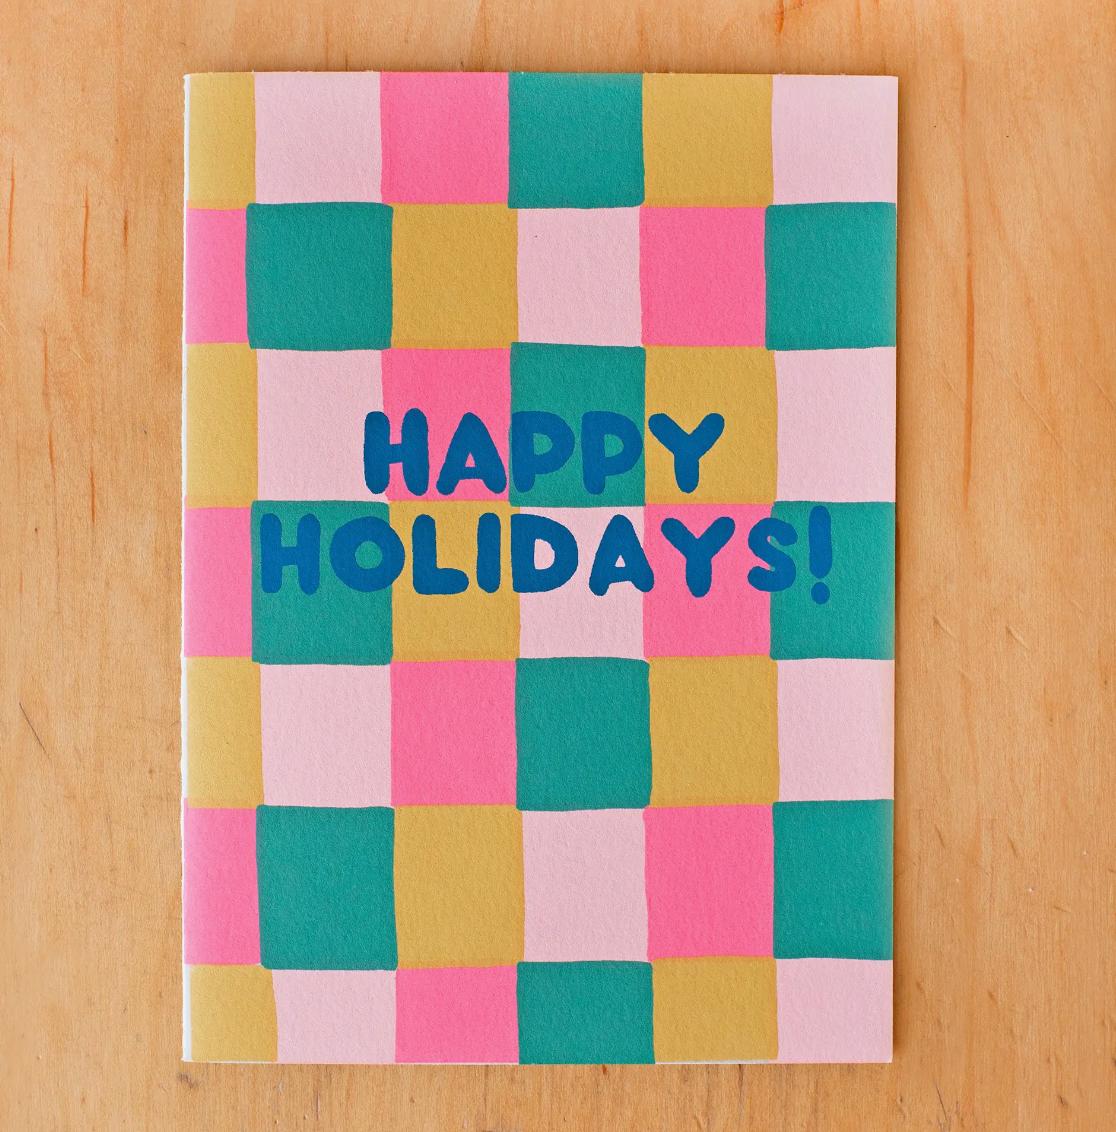 Happy Holiday Squares Card